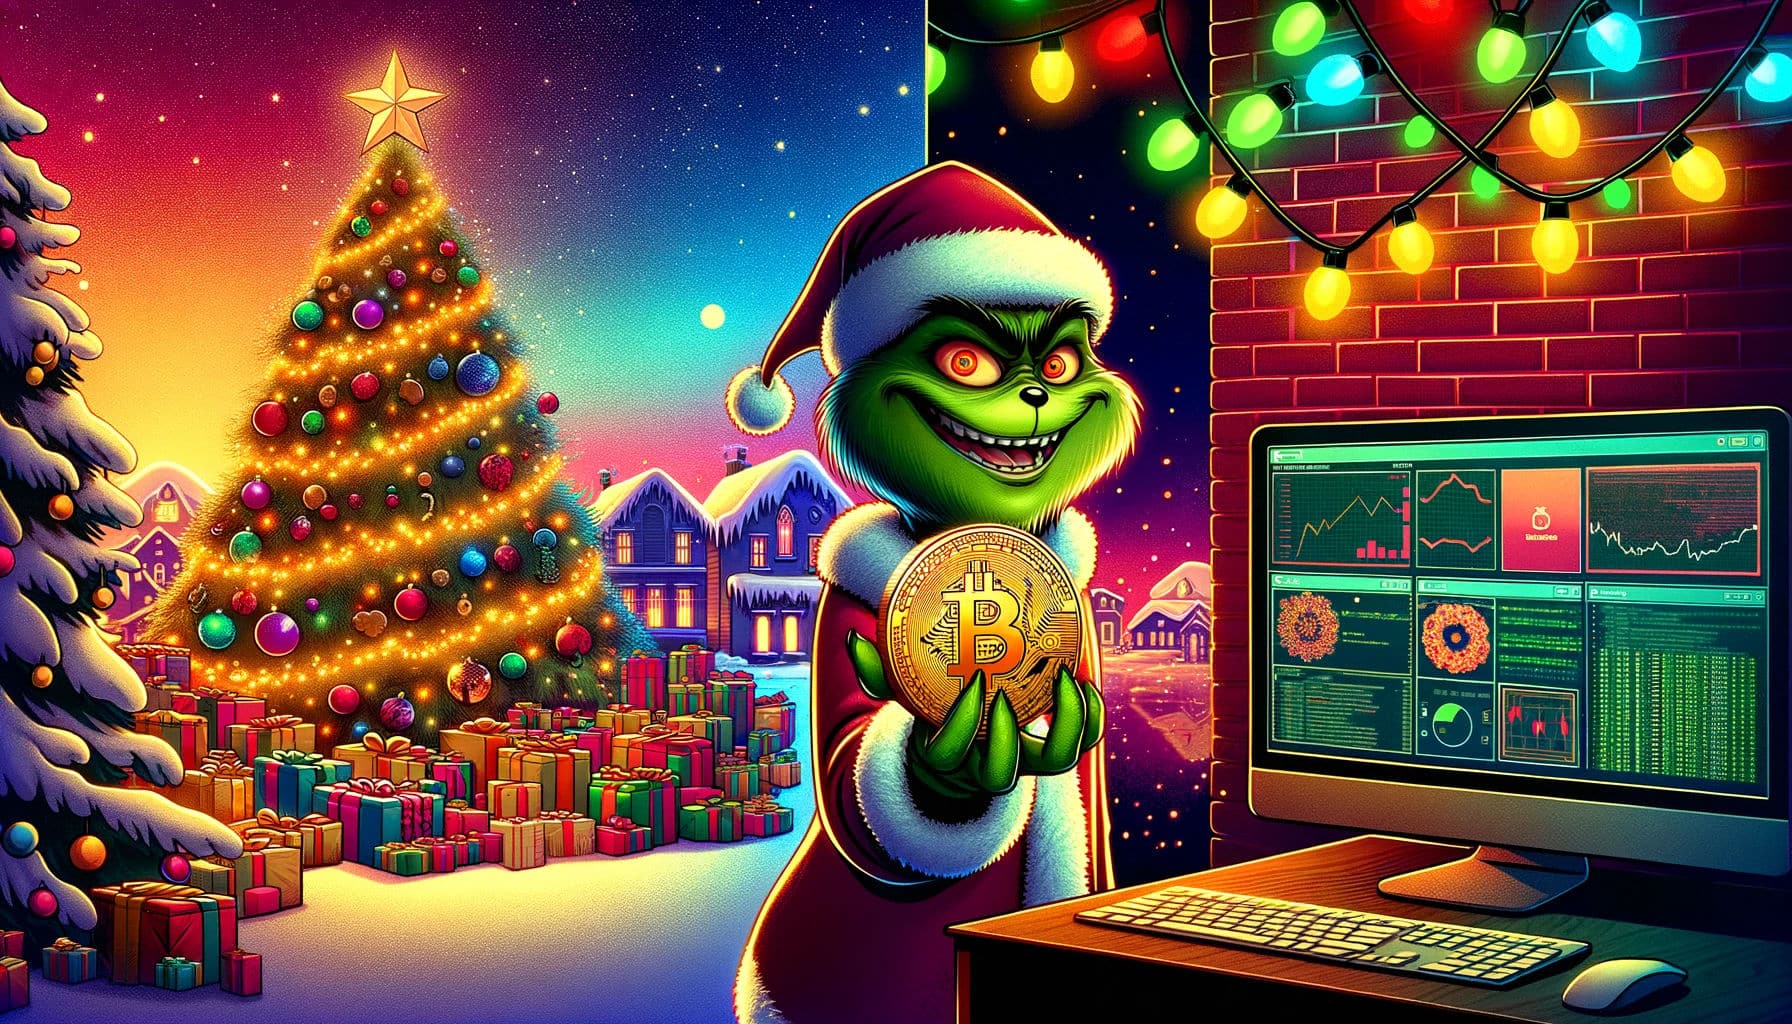 Grinch holding stolen crypto after $3 million was lost to a Christmas phishing scam.